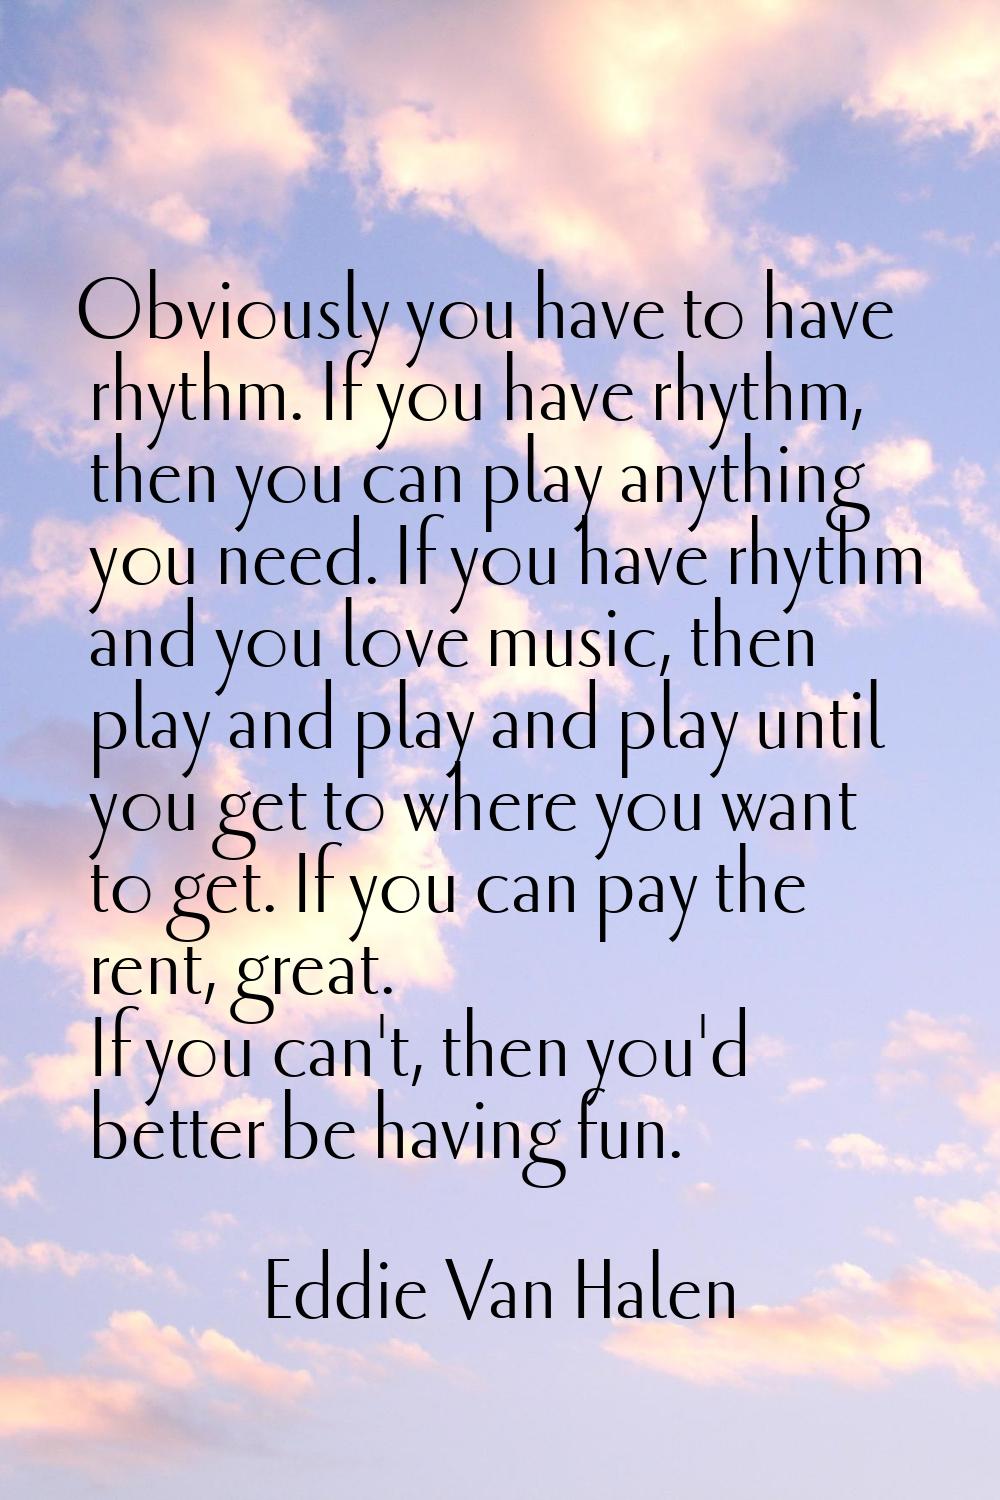 Obviously you have to have rhythm. If you have rhythm, then you can play anything you need. If you 